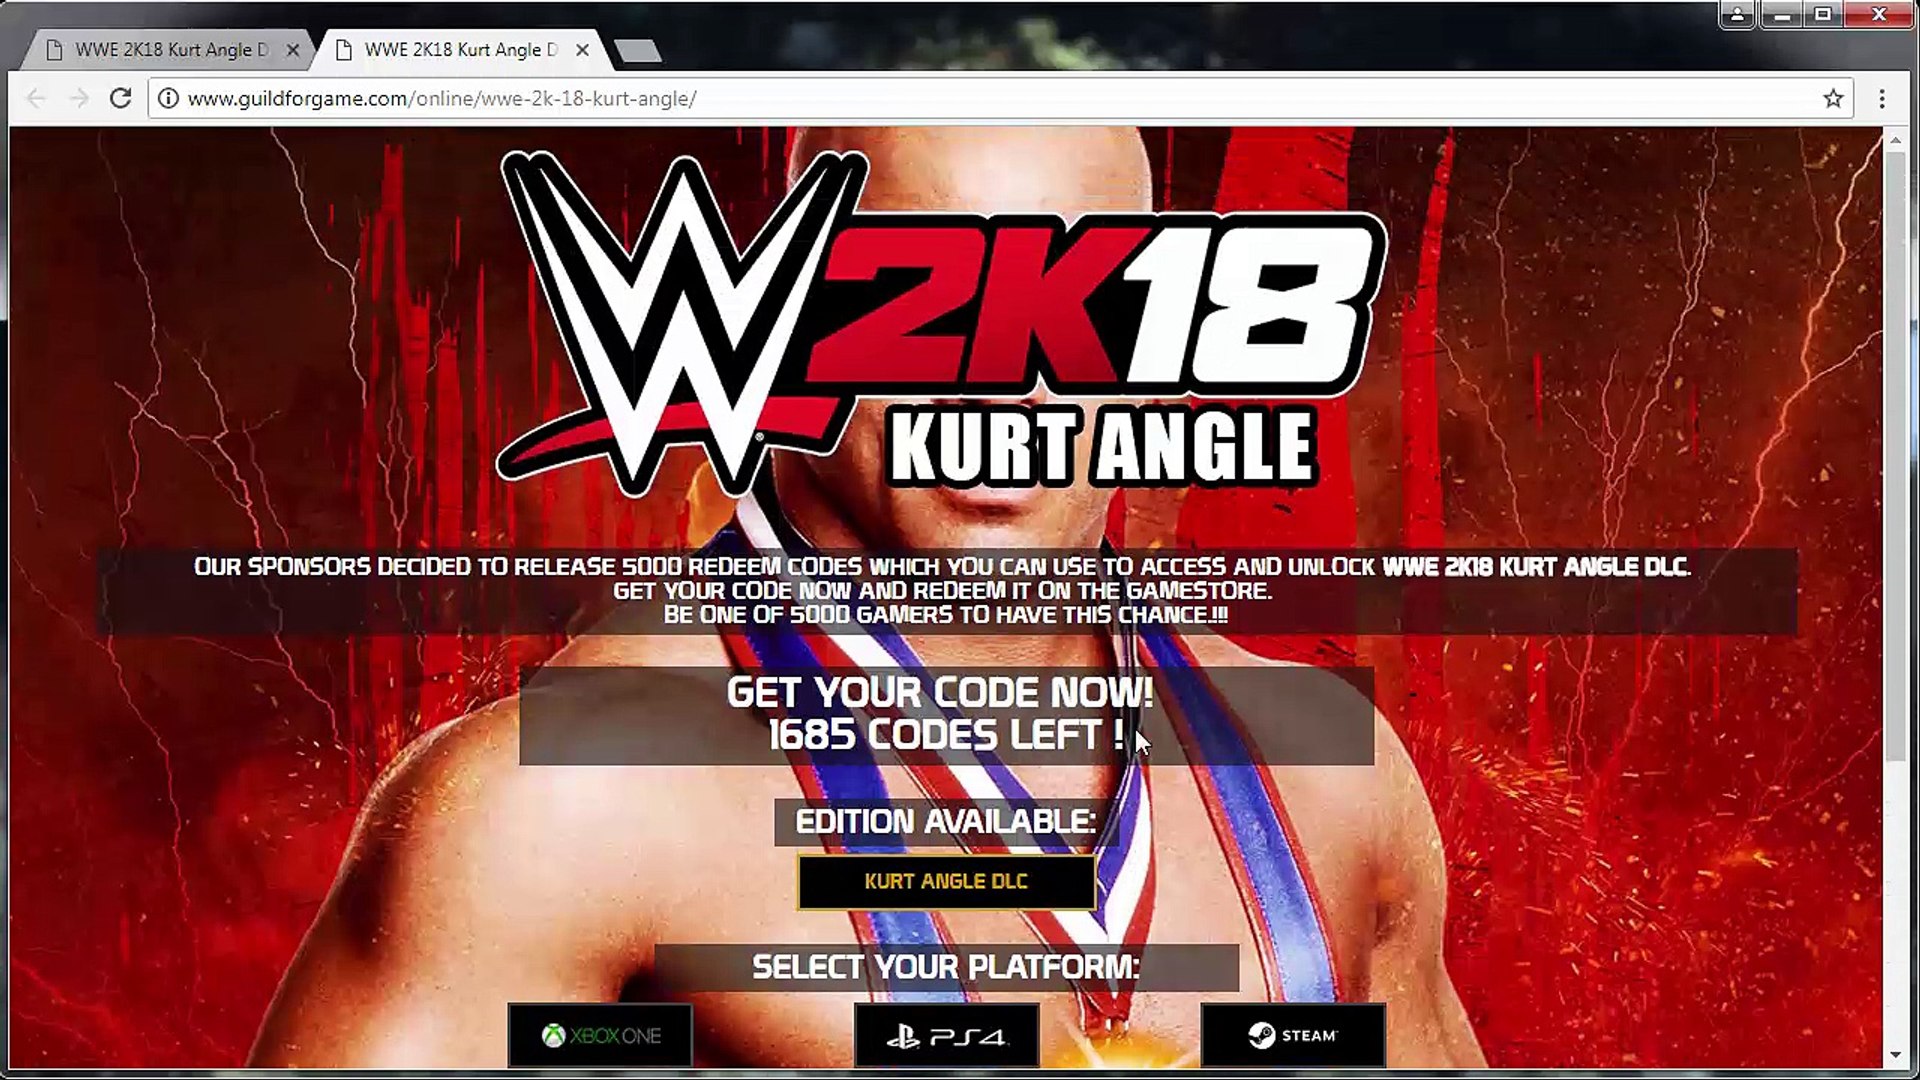 How to Get WWE 2K18 Kurt Angle DLC Code Free - Xbox One, PS4 and PC - video  Dailymotion